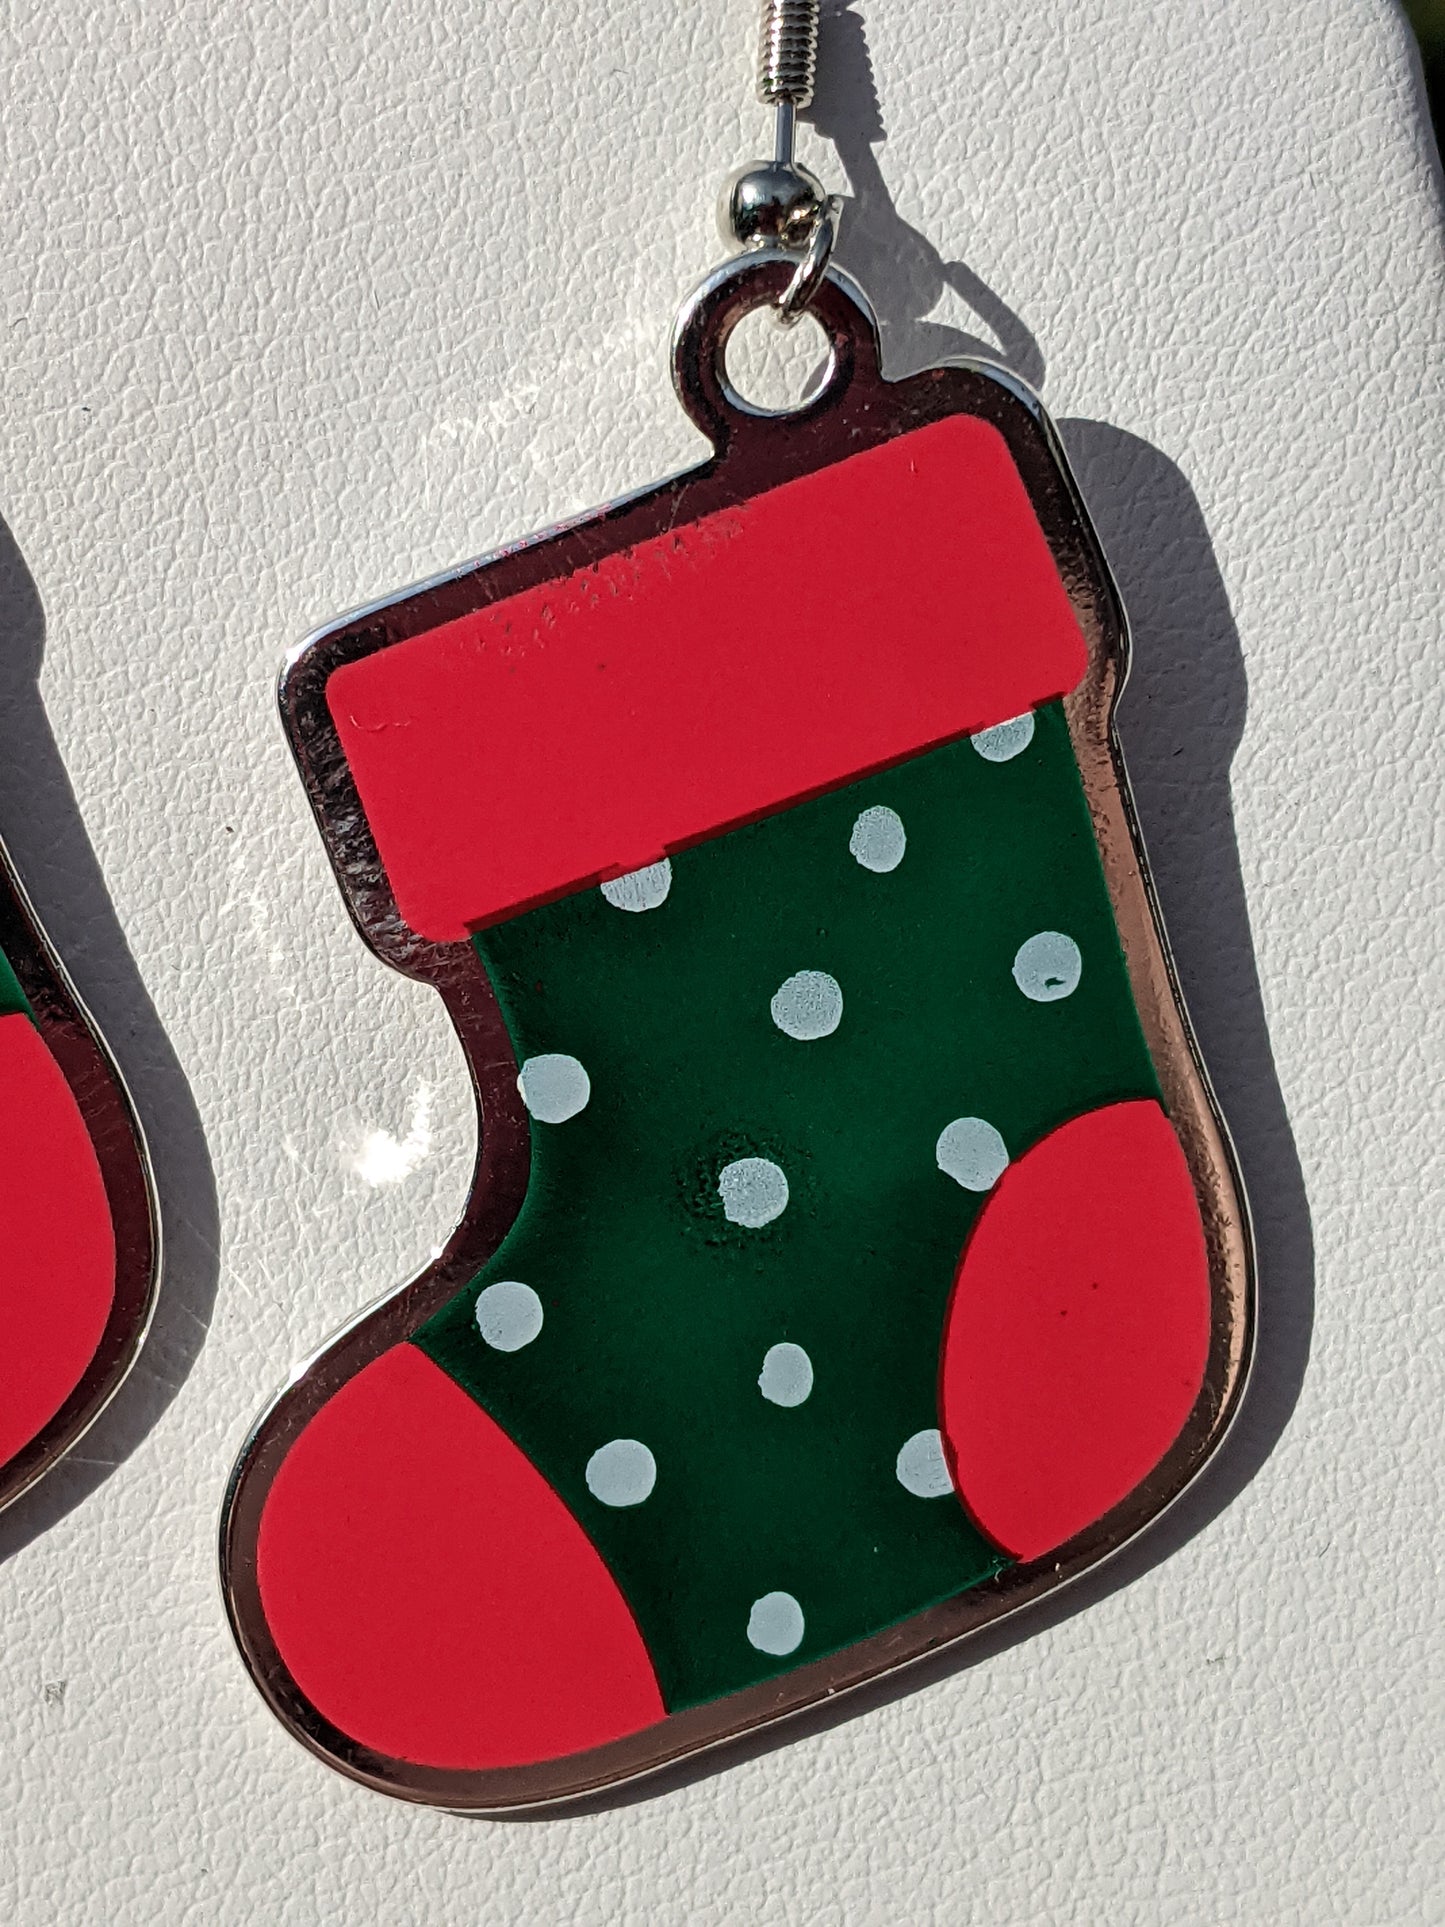 Red and Green Holiday Stocking Earrings